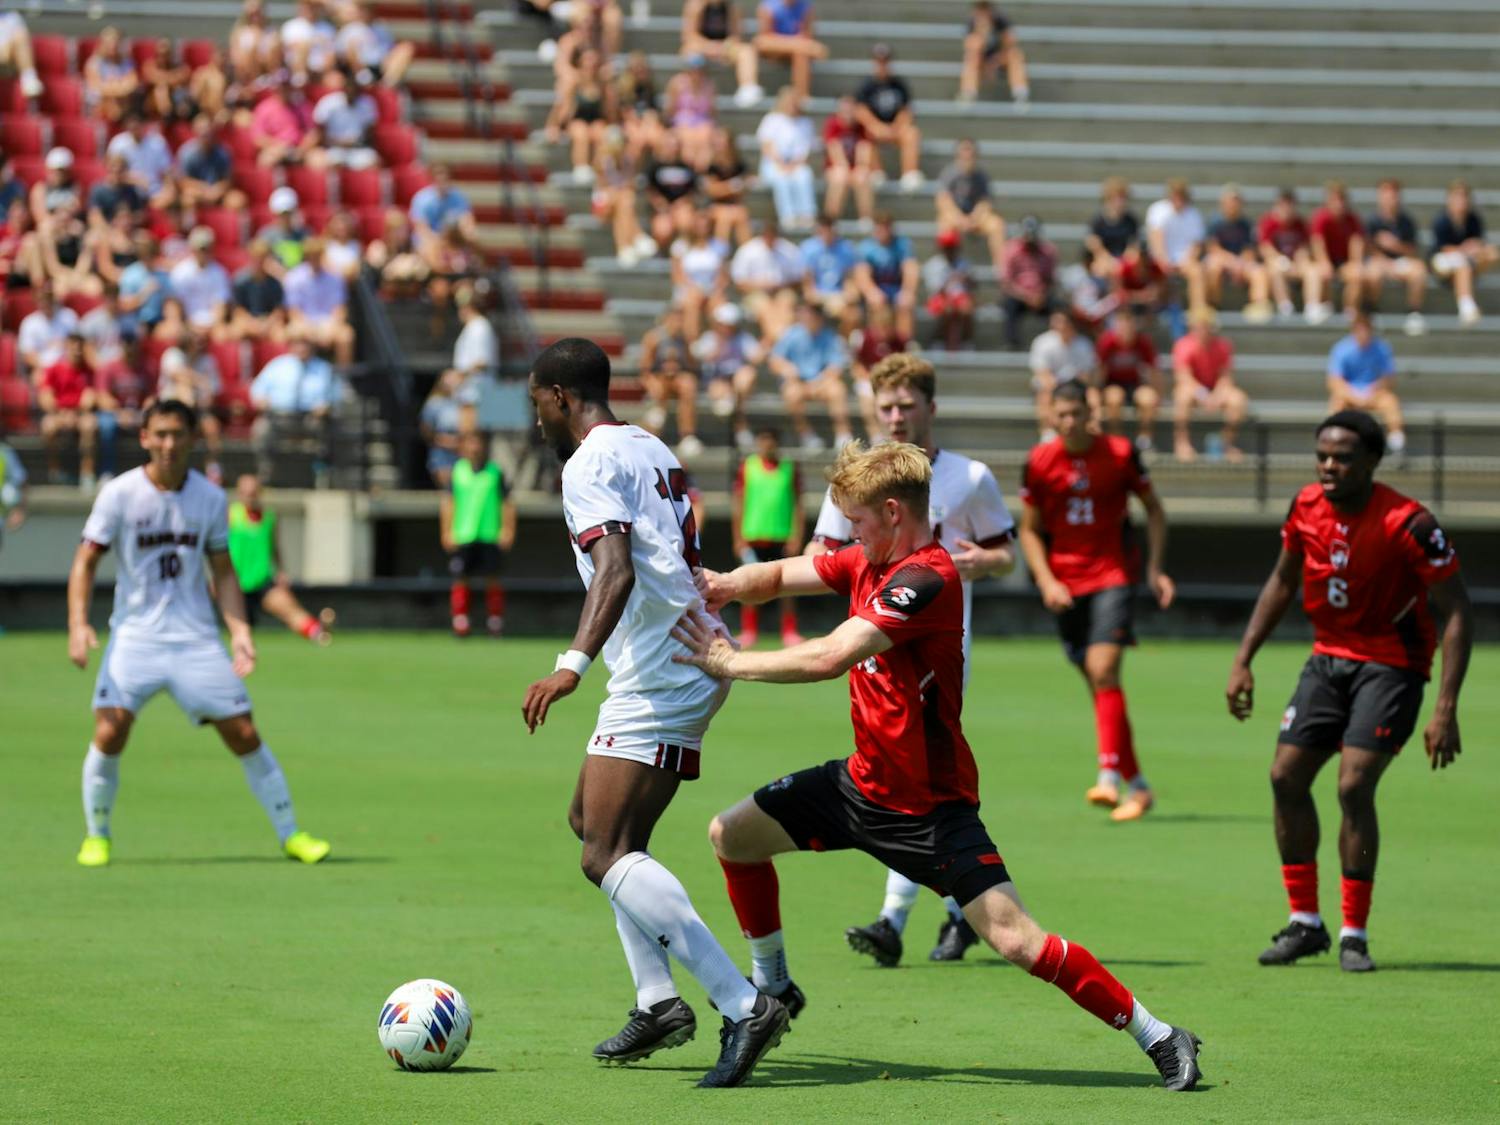 Senior defender Jaiden Ramsay-Kelly shields the ball from Gardner-Webb players while he looks for a teammate to set up a pass. The Gamecocks fell to the Bulldogs 2-0 in its first home game.